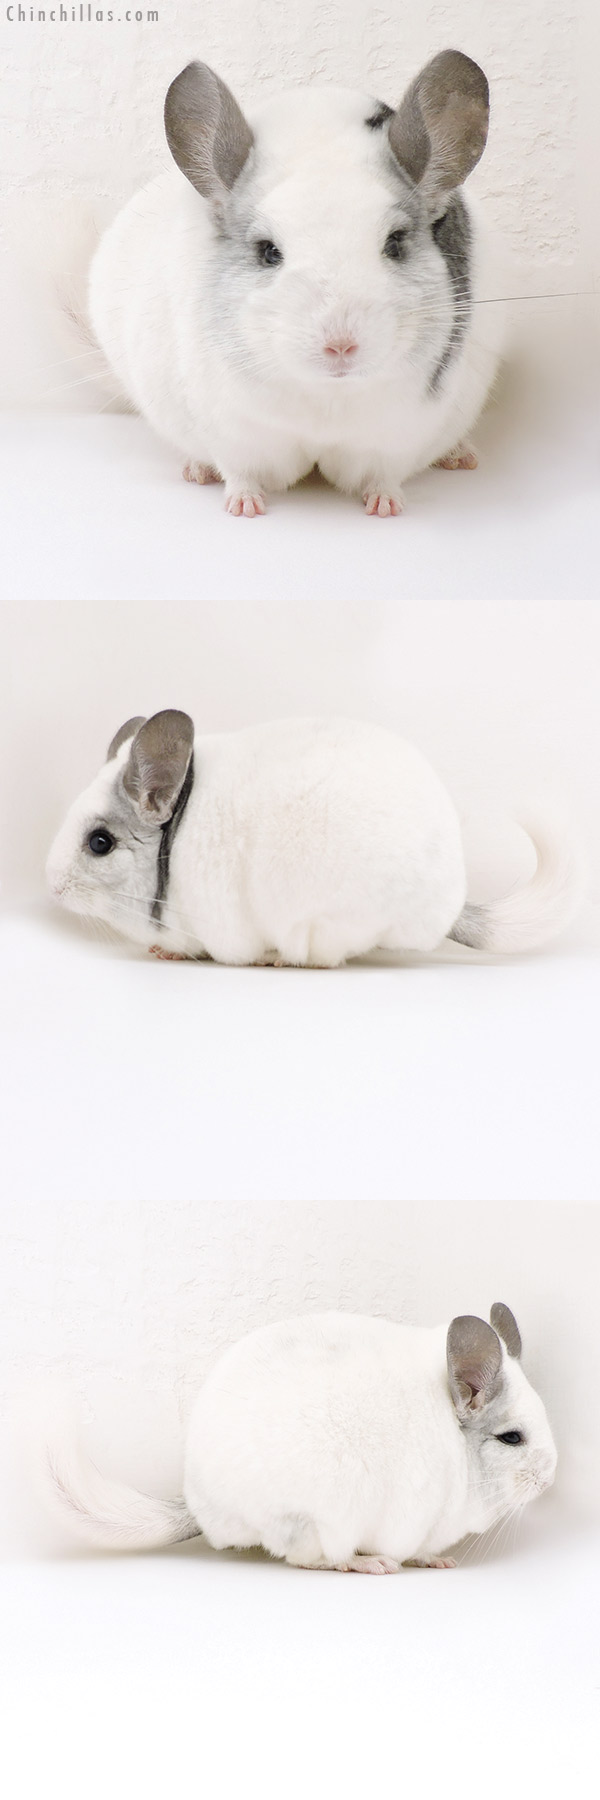 Chinchilla or related item offered for sale or export on Chinchillas.com - 18148 Large Blocky Herd Improvement Quality Extreme White Mosaic Male Chinchilla